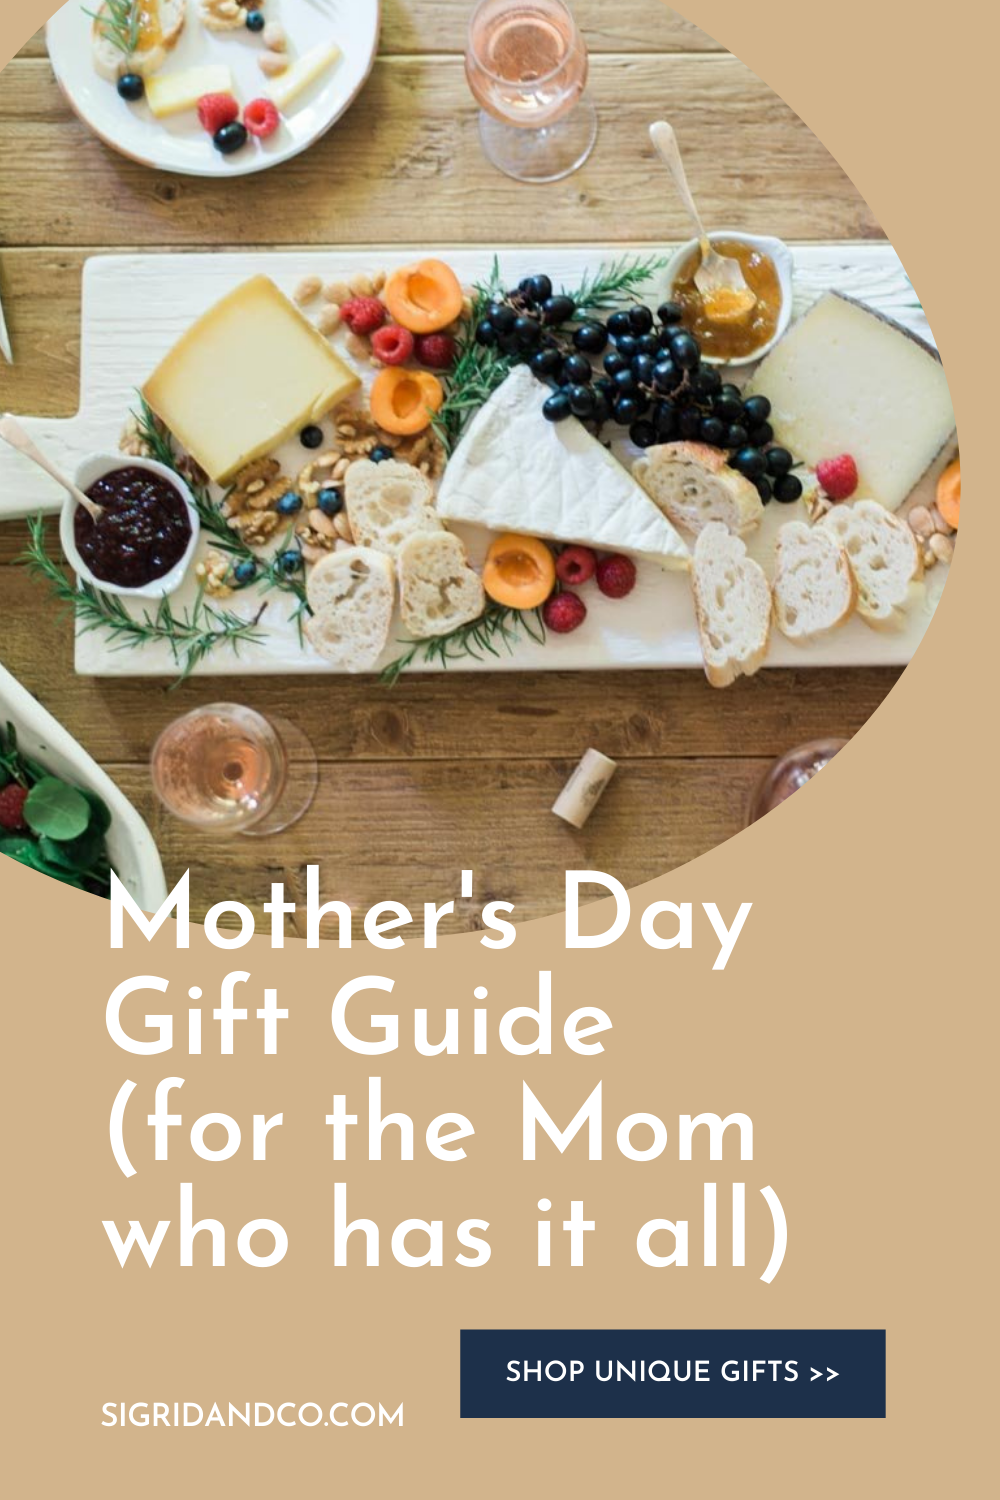 Mother's Day Gift Guide (for the Mom who has it all)